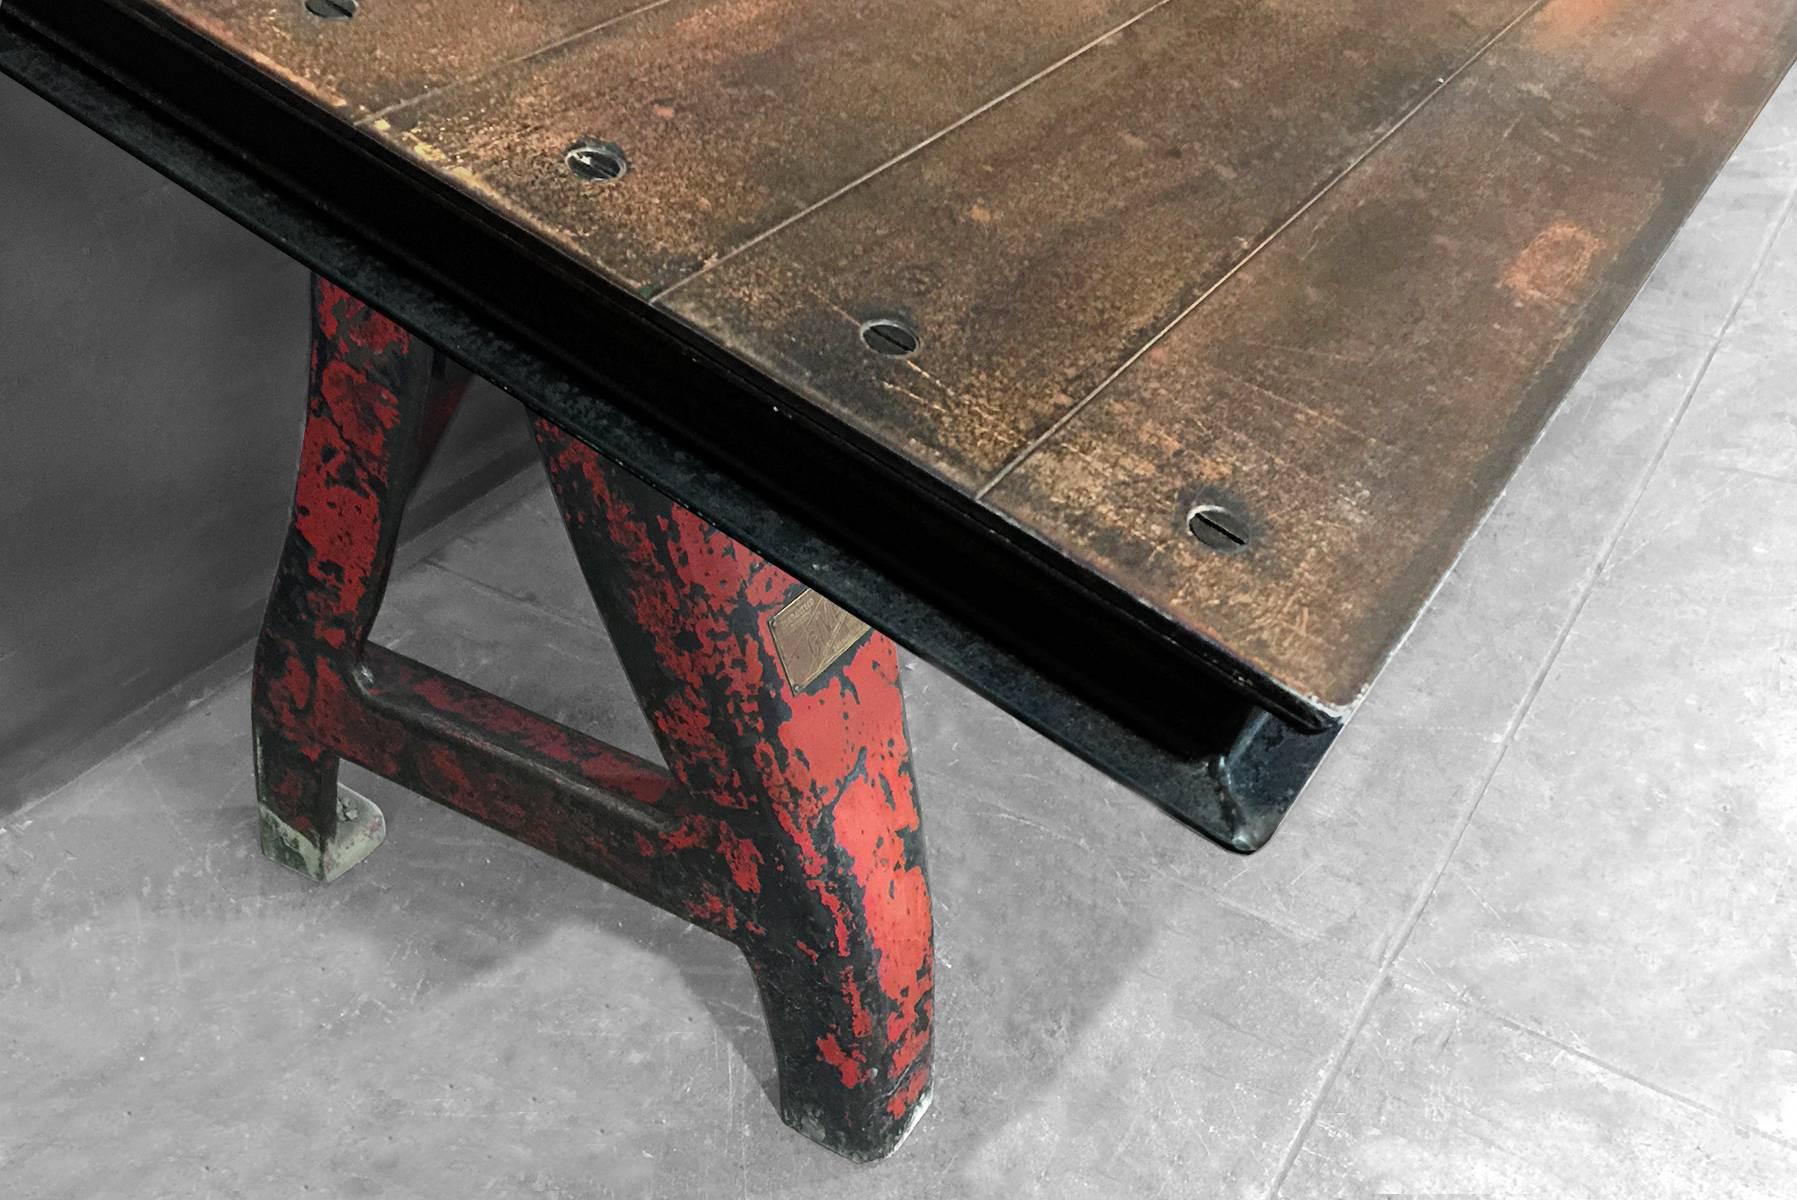 Massive custom-made plate steel top mounted on an antique Industrial machine base. Awesome vintage patina on legs and distressed tabletop. Currently on a tilted riser. Can be mounted flat to serve as a conference or dining table. Dimensions: